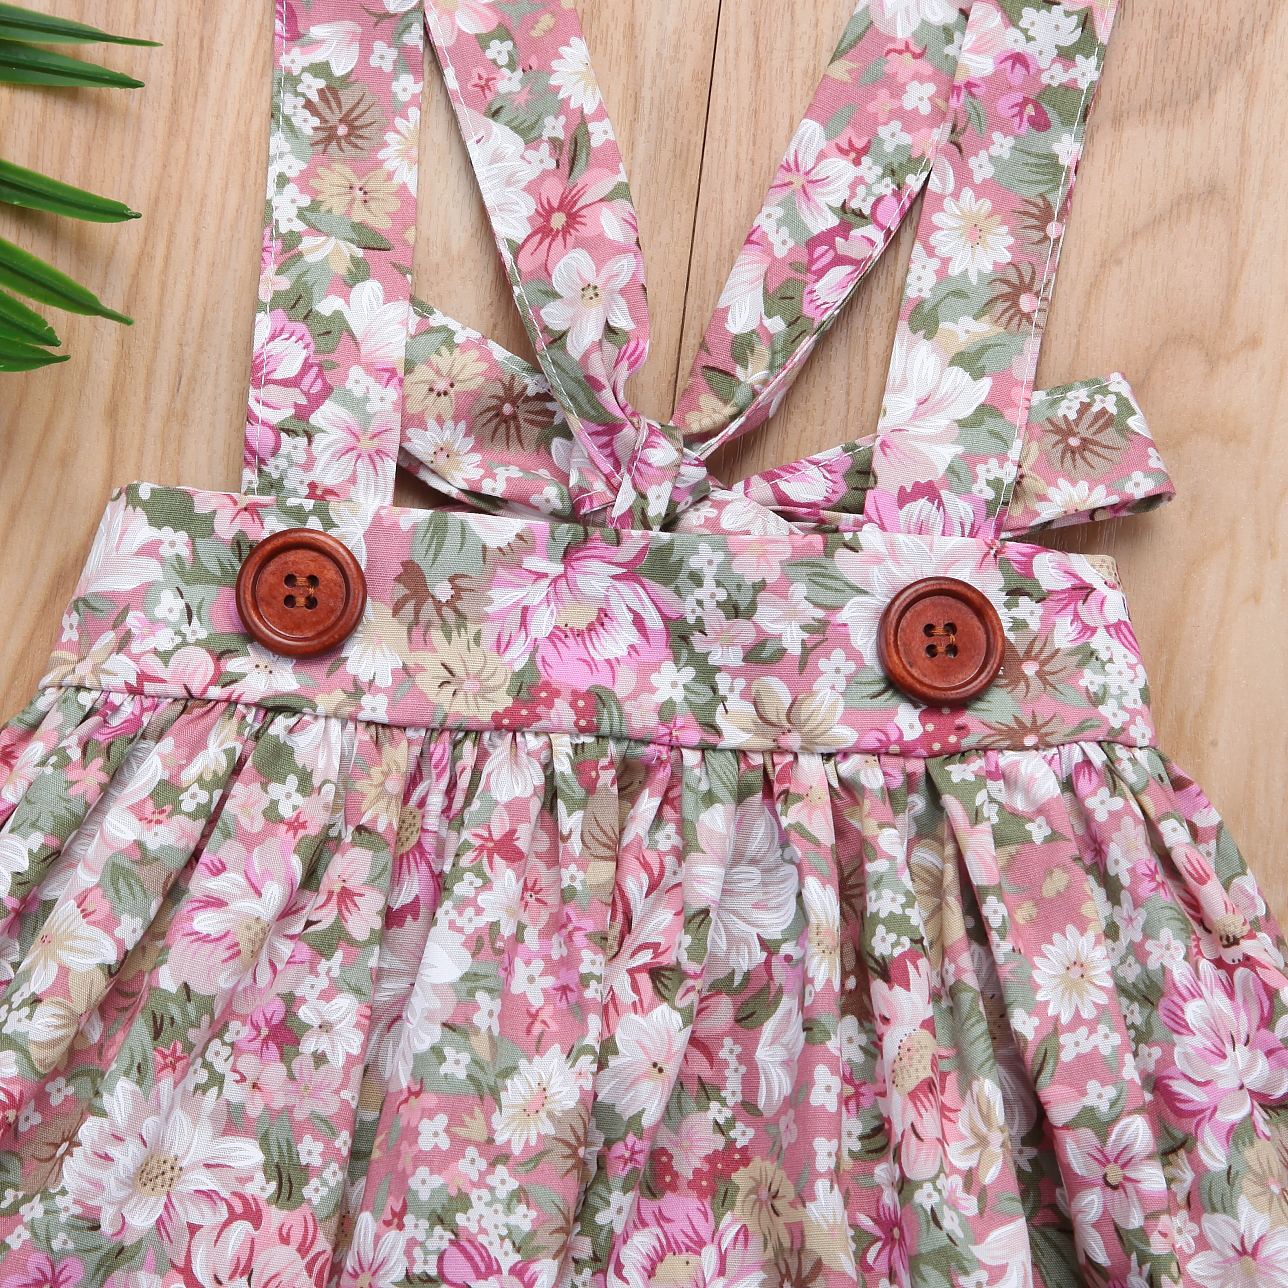 Newborn Toddler Baby Girls Floral Party Princess Bib Strap Skirts Outfits